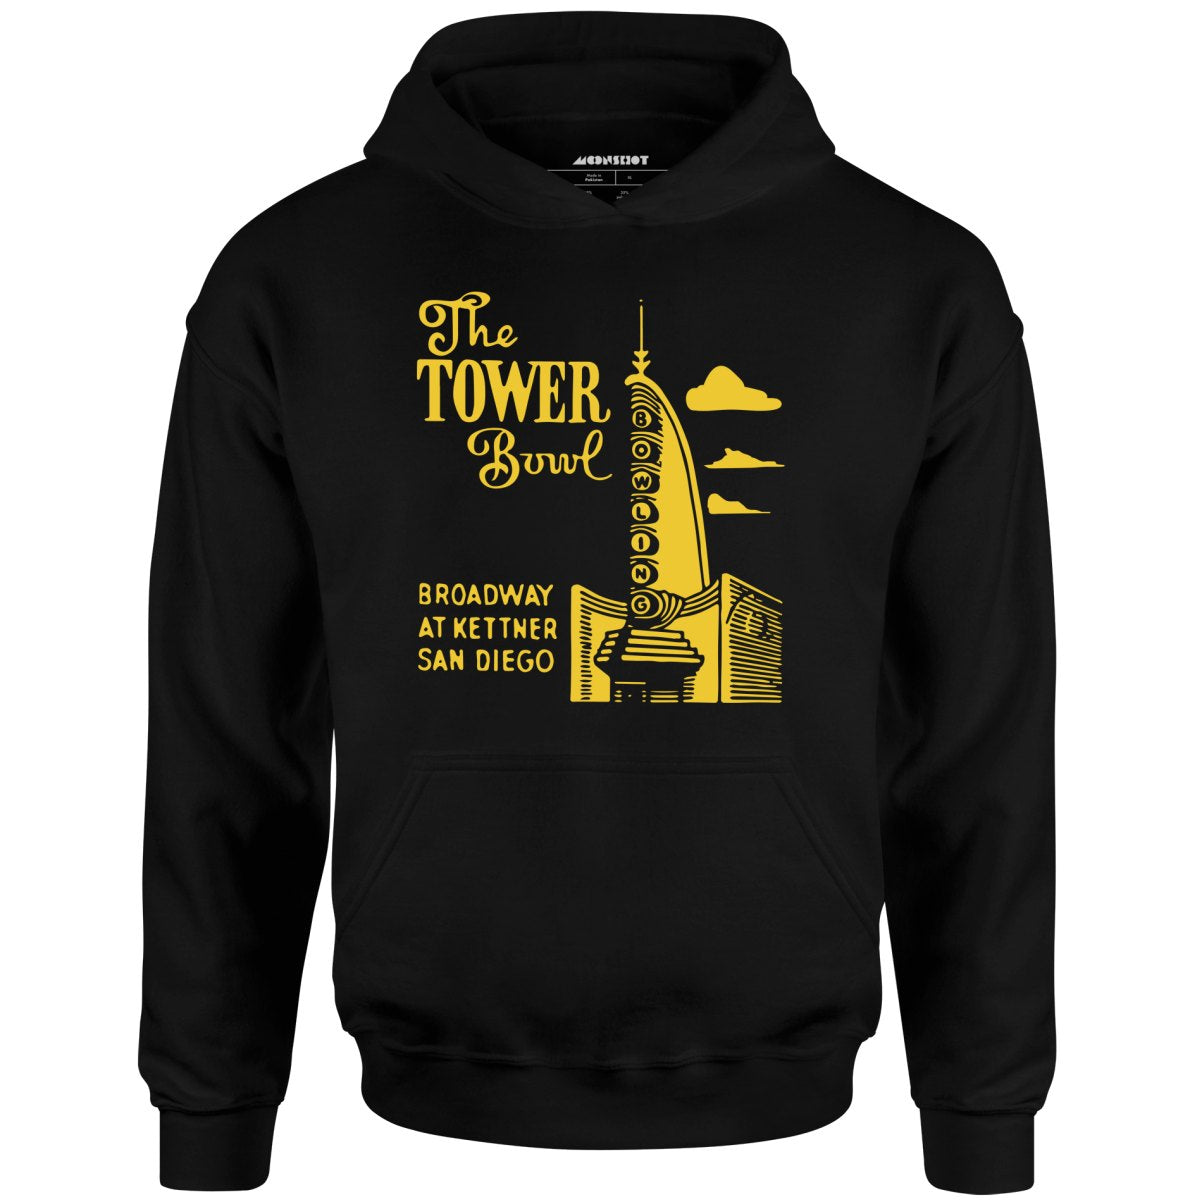 The Tower Bowl - San Diego, CA - Vintage Bowling Alley - Unisex Hoodie